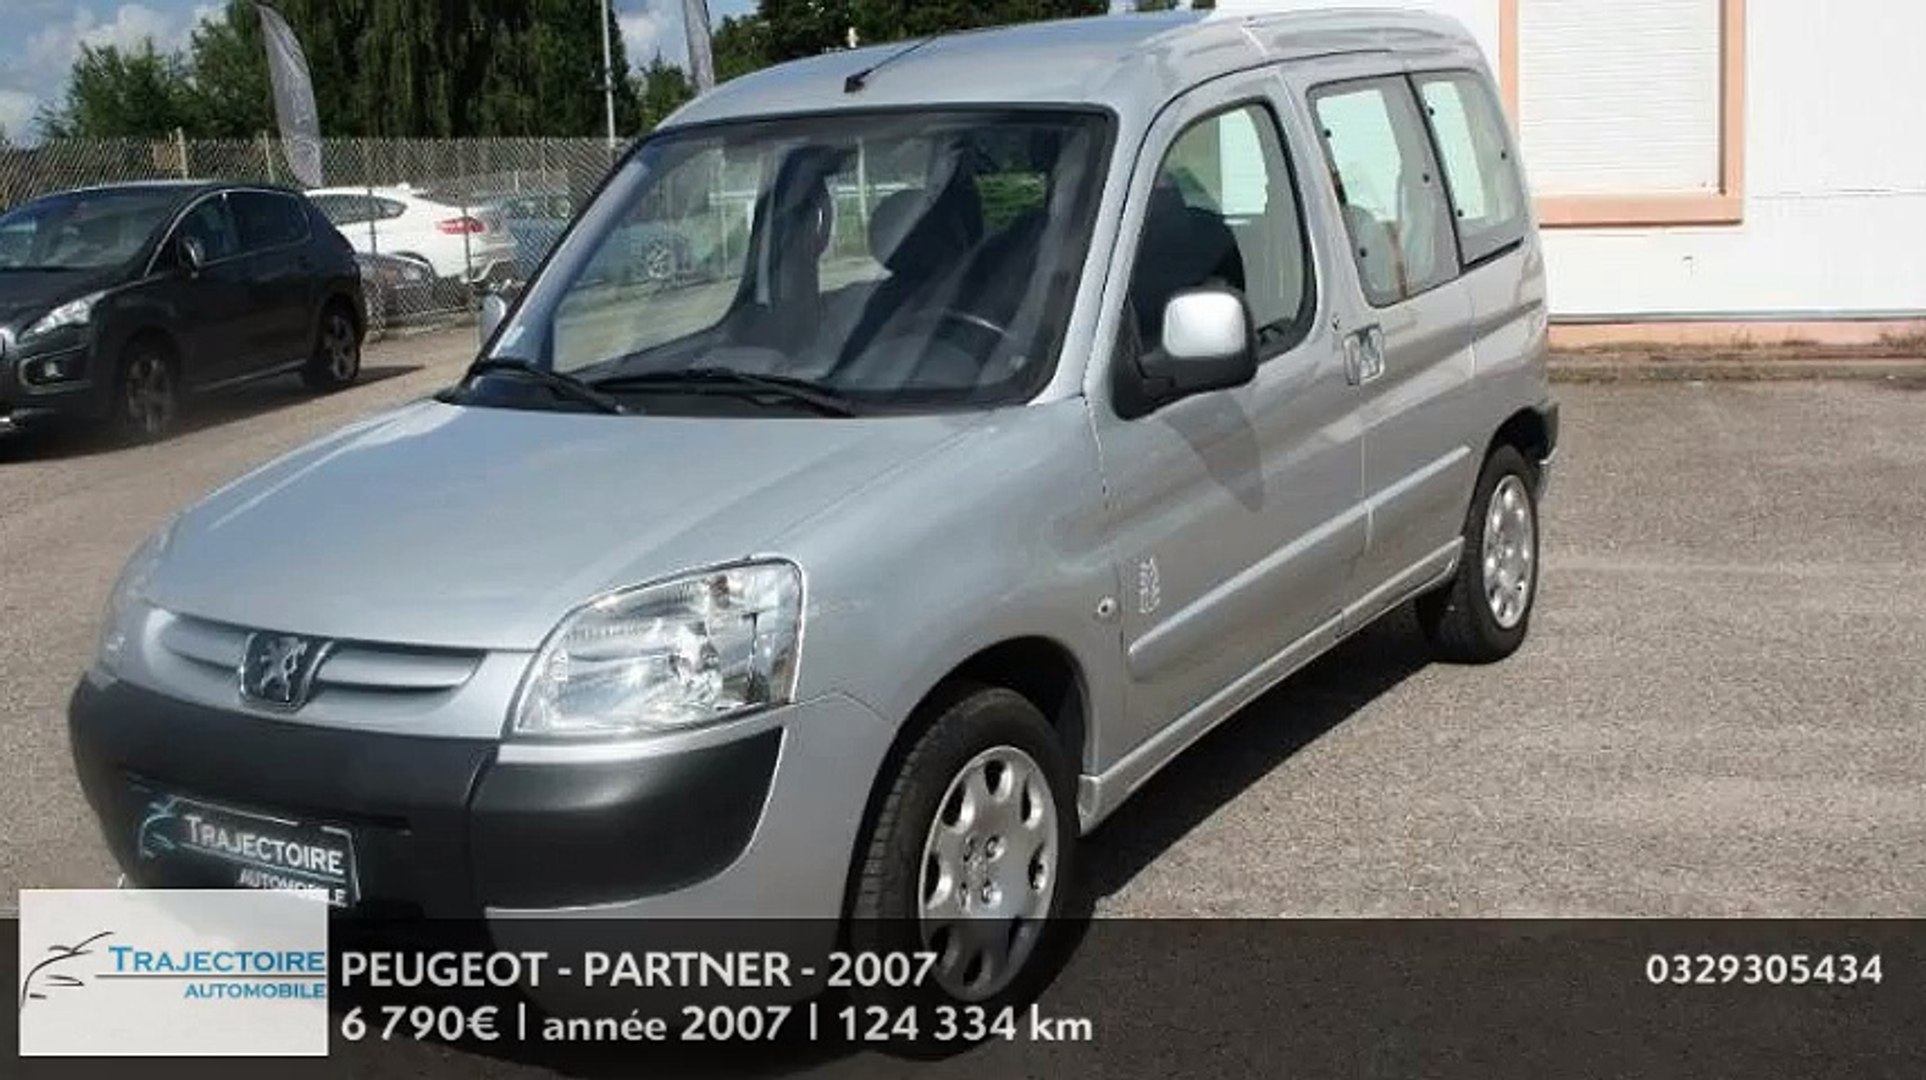 Annonce Occasion PEUGEOT Partner 1.6 HDi90 Totem Clim 2007 - Vidéo  Dailymotion